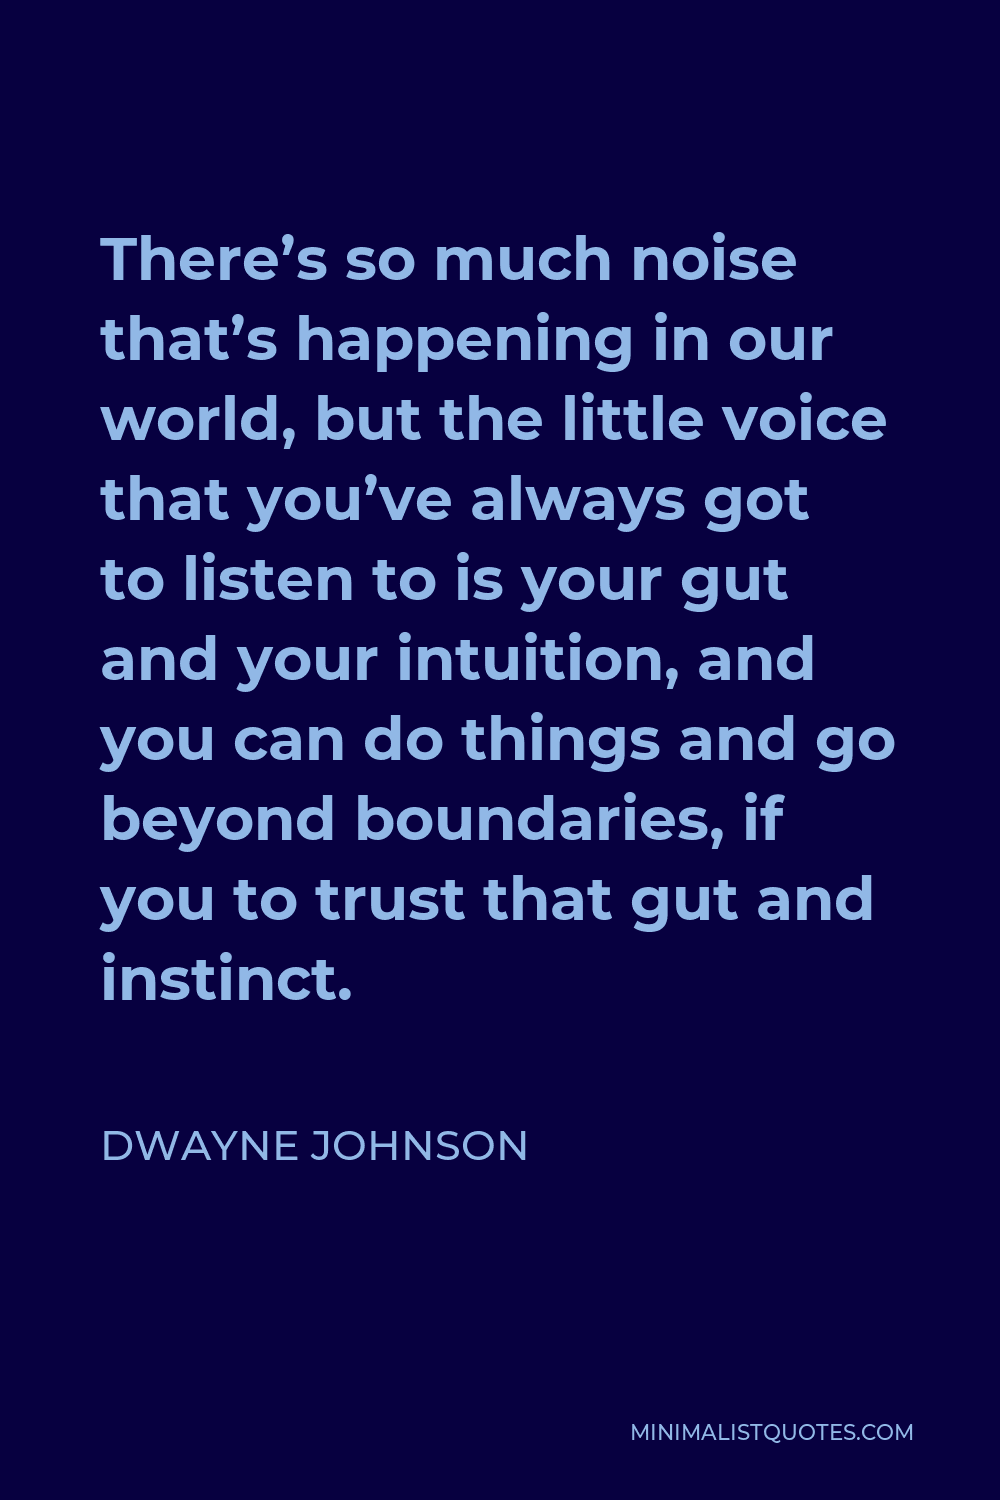 Dwayne Johnson Quote - There’s so much noise that’s happening in our world, but the little voice that you’ve always got to listen to is your gut and your intuition, and you can do things and go beyond boundaries, if you to trust that gut and instinct.